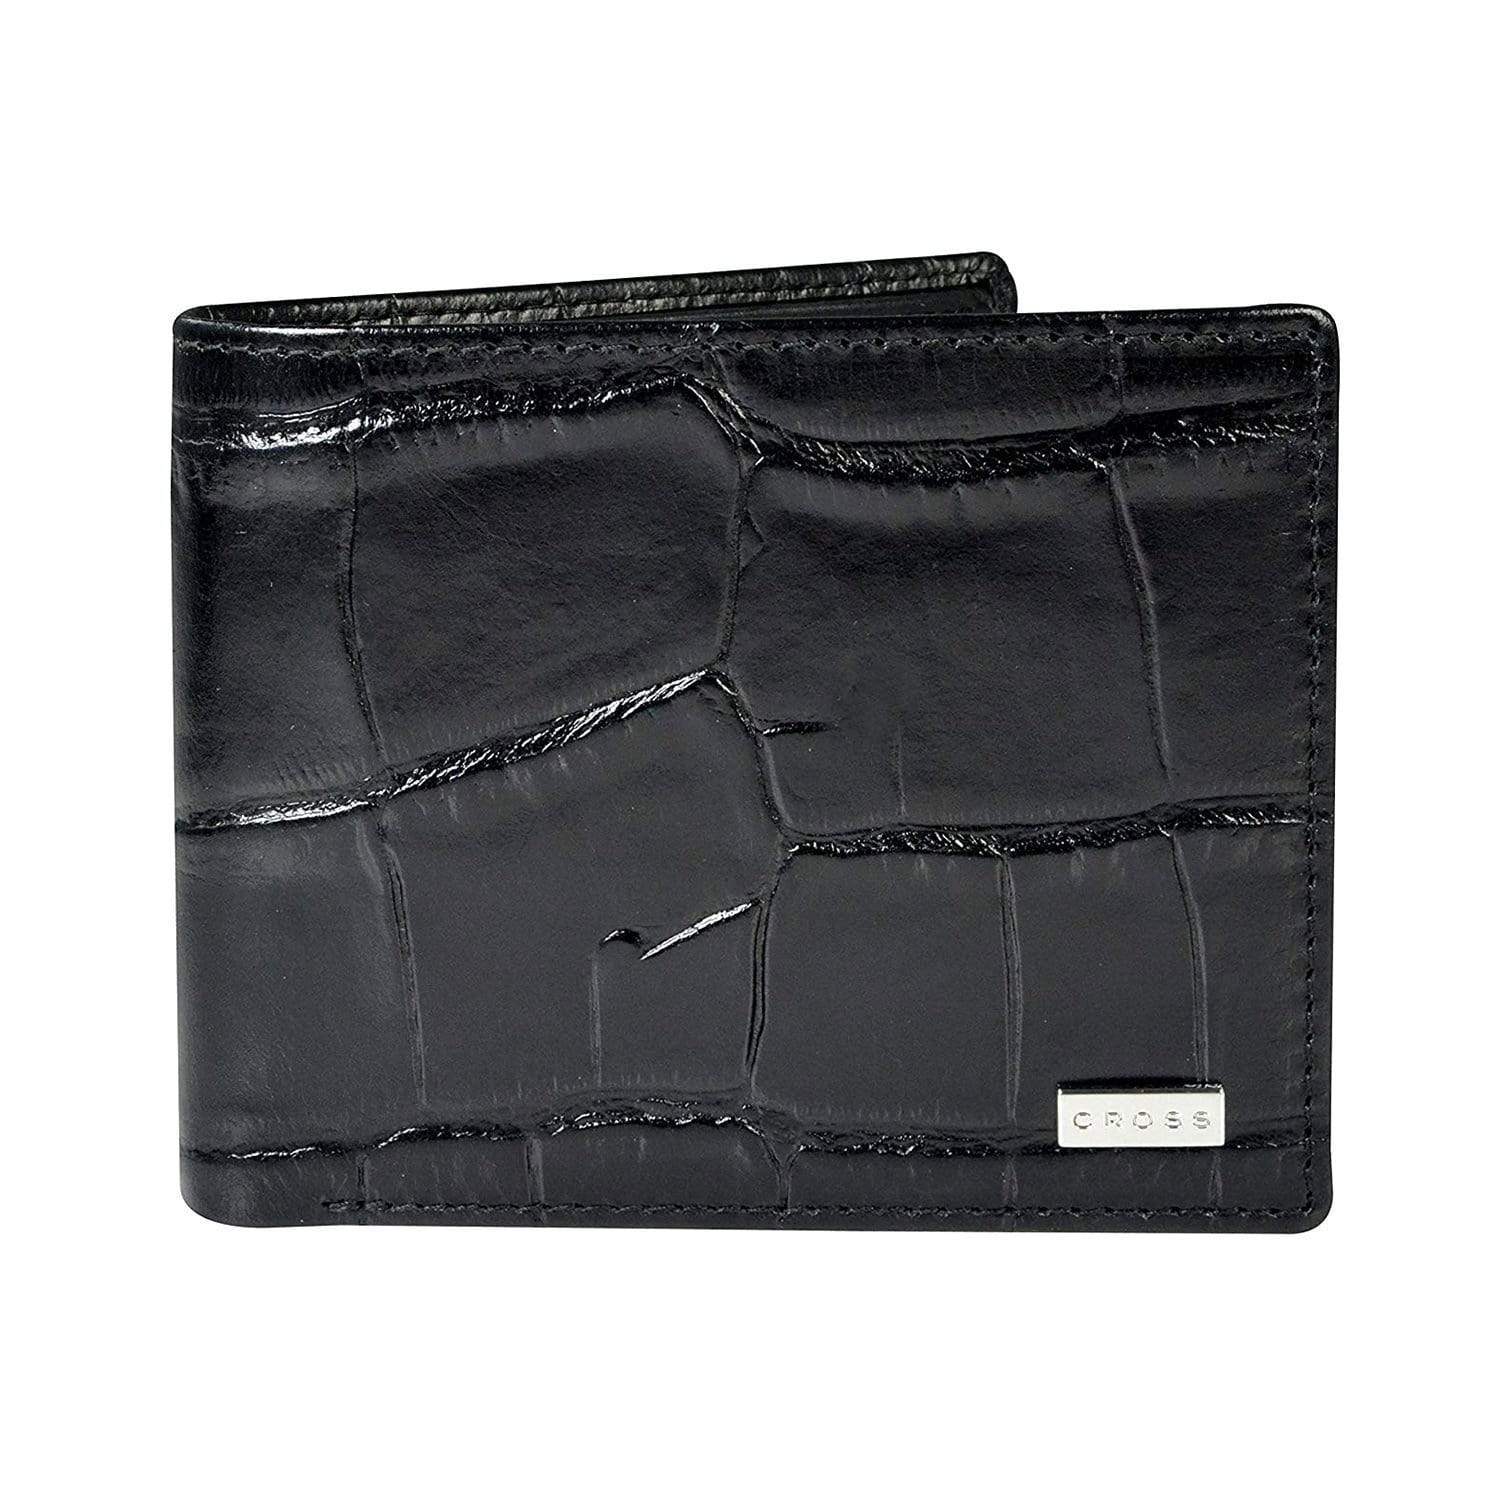 Cross Coco Signature Bifold Coin Leather Wallet for Men  - Black and Red - AC268072-1-3 - Jashanmal Home